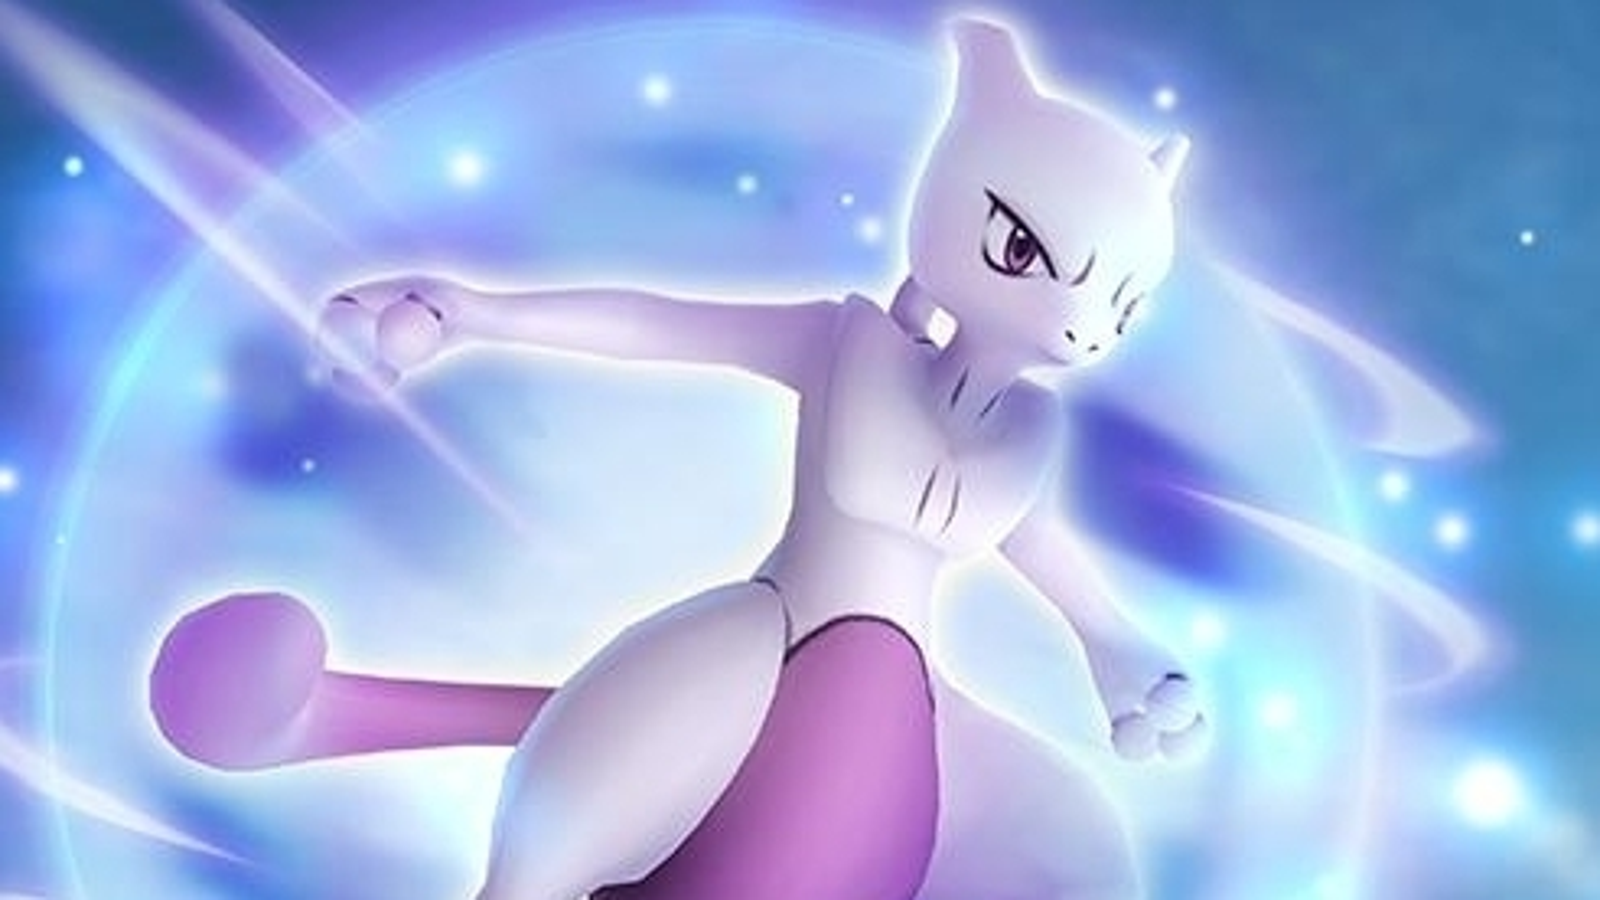 How to Find (& Catch) Armored Mewtwo in Pokémon Go